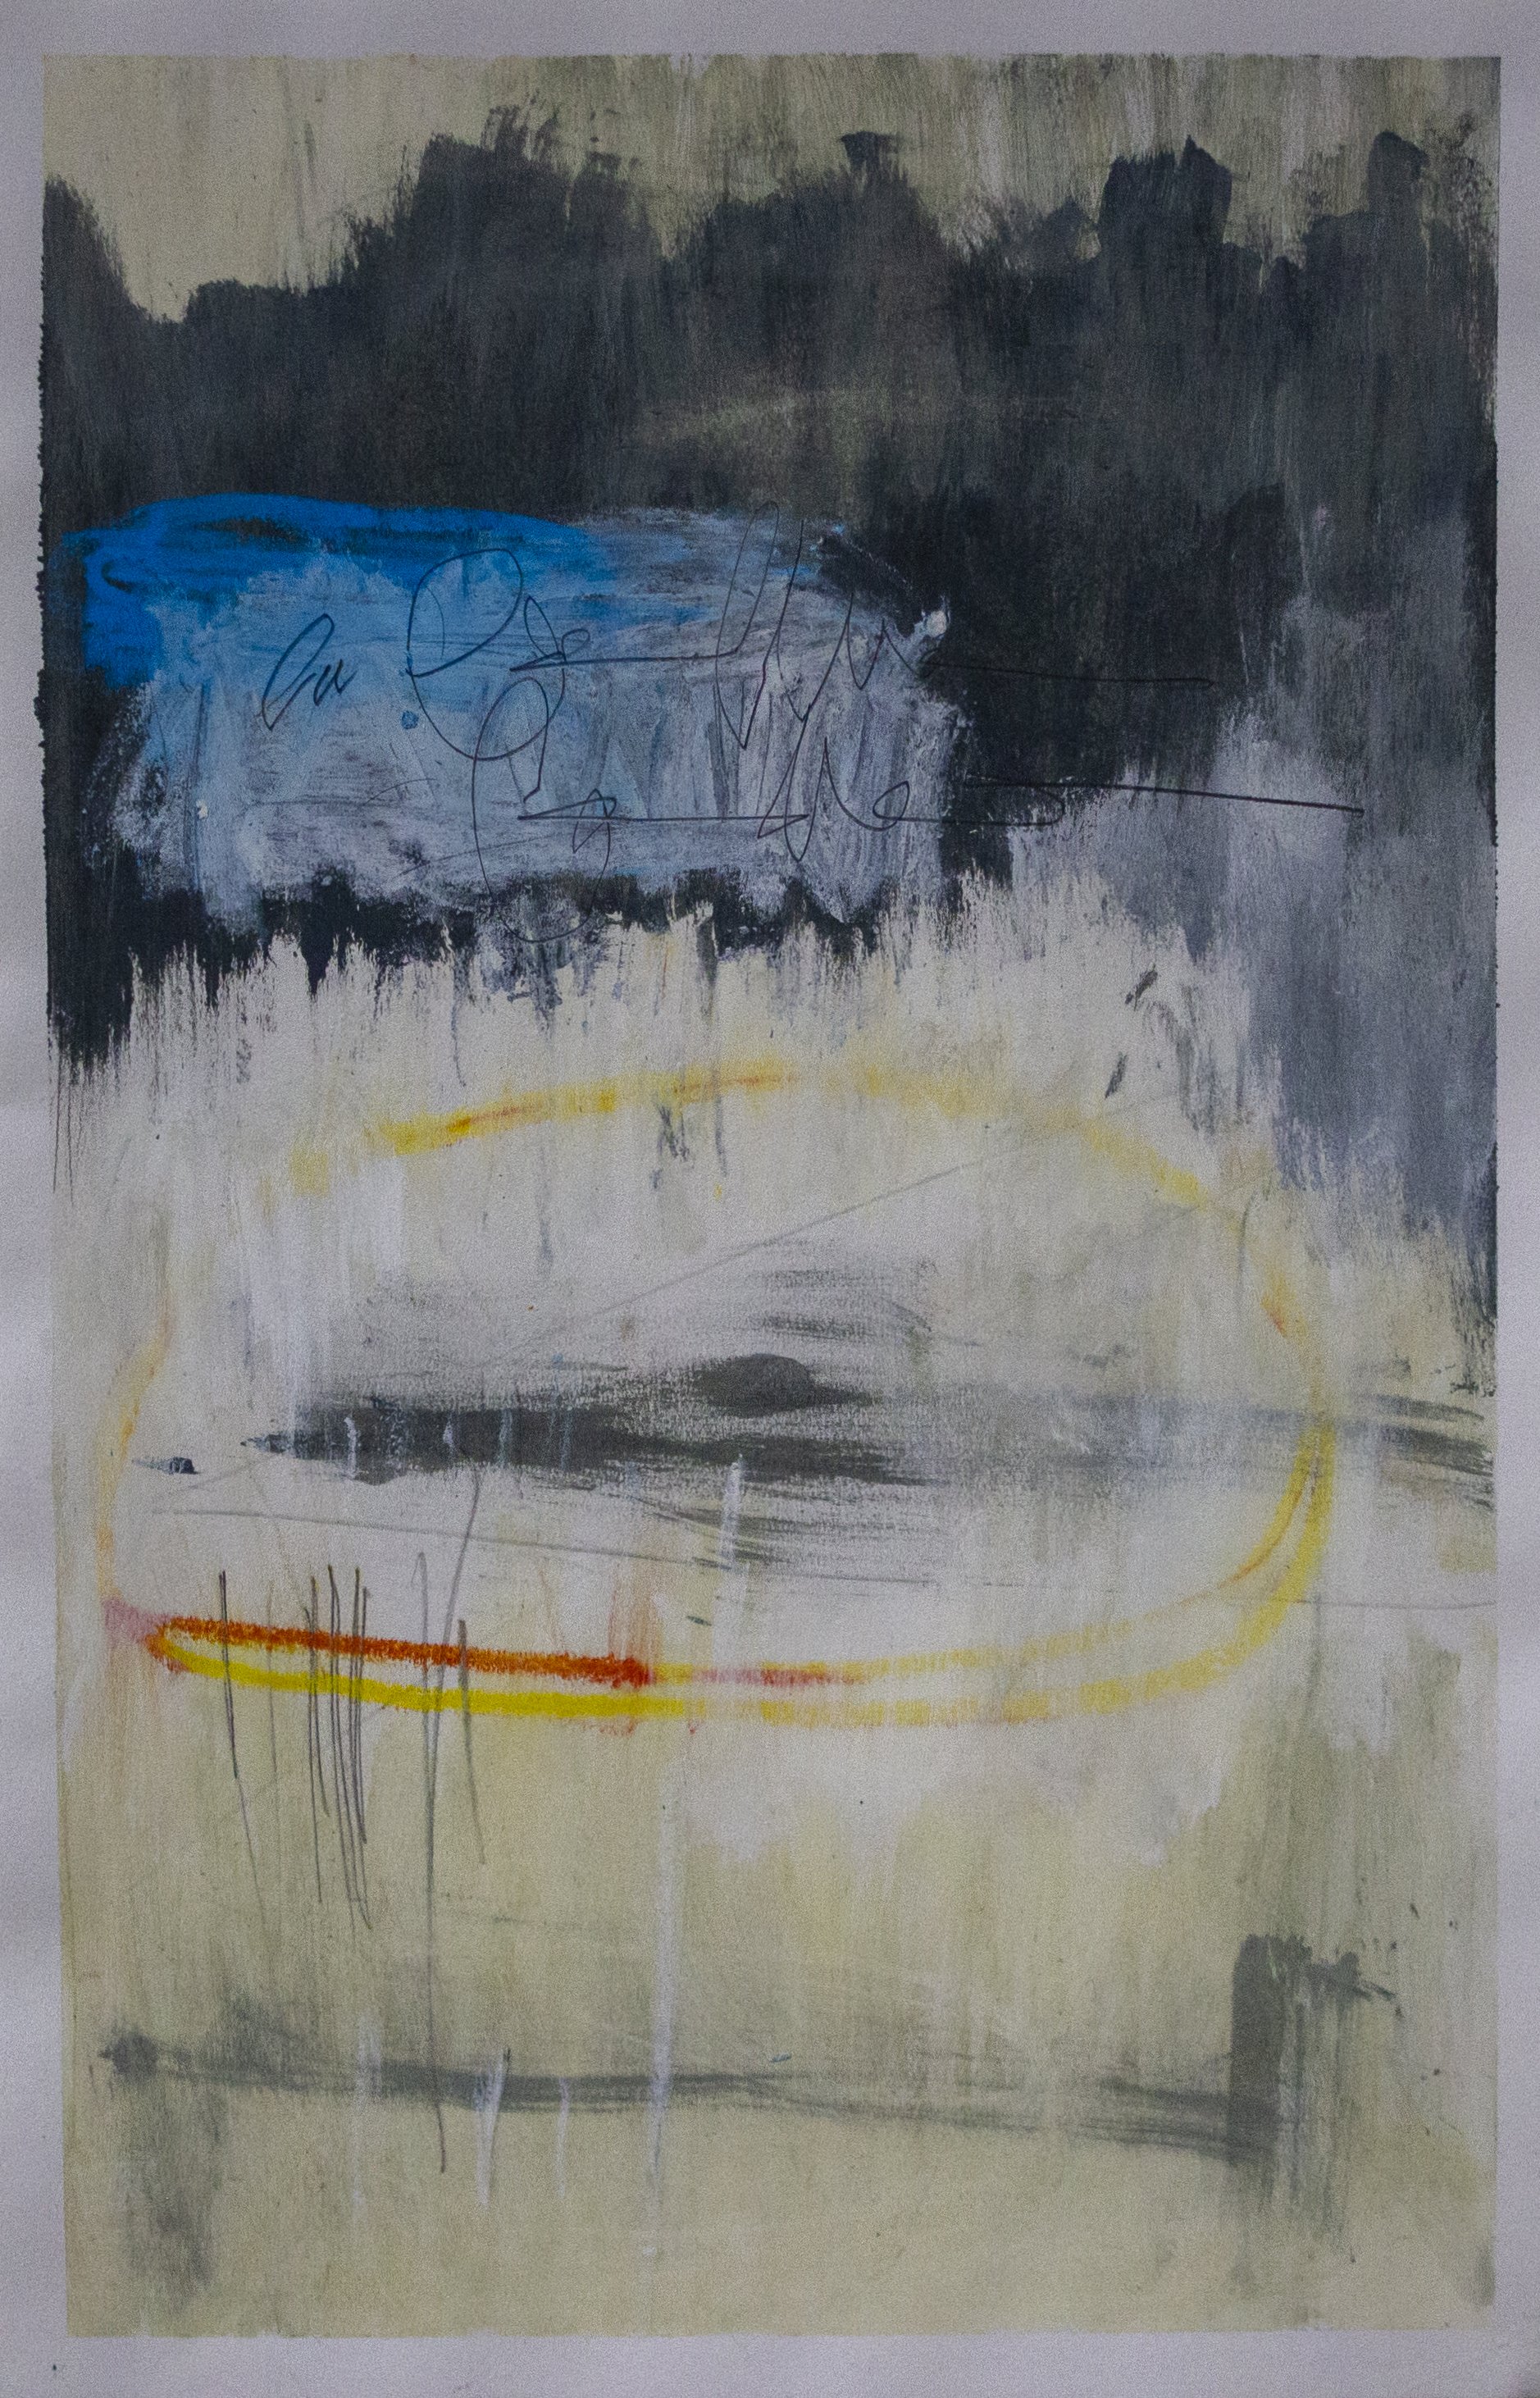   Suintement , 2022.  11 x 17 inches  Acrylic, Crayon, Pastel and Pencil on Paper  Private Collection 